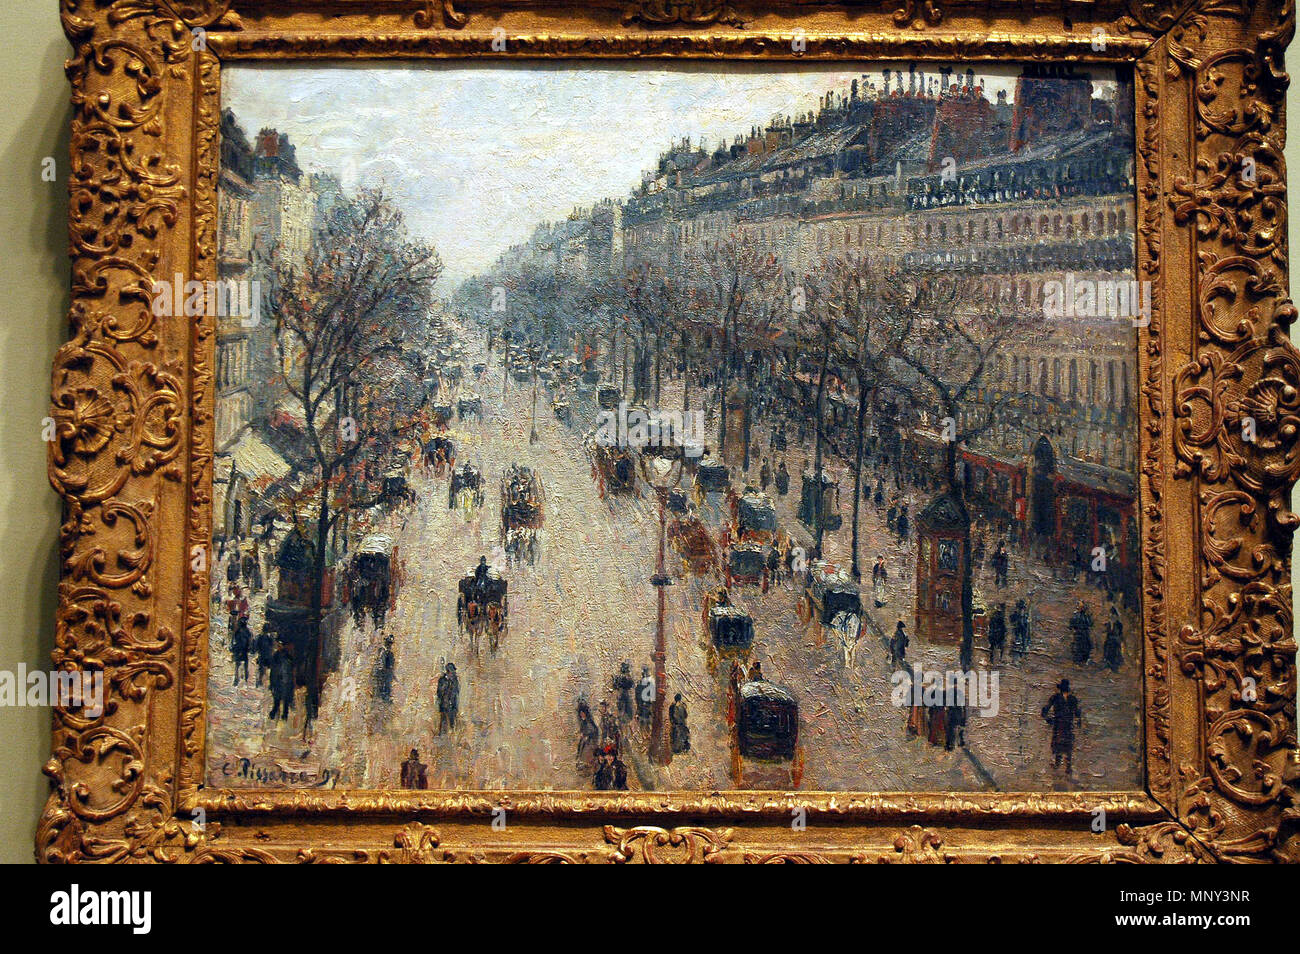 The Boulevard Montmartre on a Winter Morning .  Camille Pissarro (French, 1830–1903) Wikipedia Loves Art at the Metropolitan Museum of Art This photo of item # 60.174 at the Metropolitan Museum of Art was contributed under the team name 'futons of rock' as part of the Wikipedia Loves Art project in February 2009. Metropolitan Museum of Art The original photograph on Flickr was taken by AlkaliSoaps—please add a comment to the original Flickr page whenever a use has been made on Wikipedia or another project. Project galleries on Flickr: this institution, this team . 1897.   1007 WLA metmuseum Bo Stock Photo